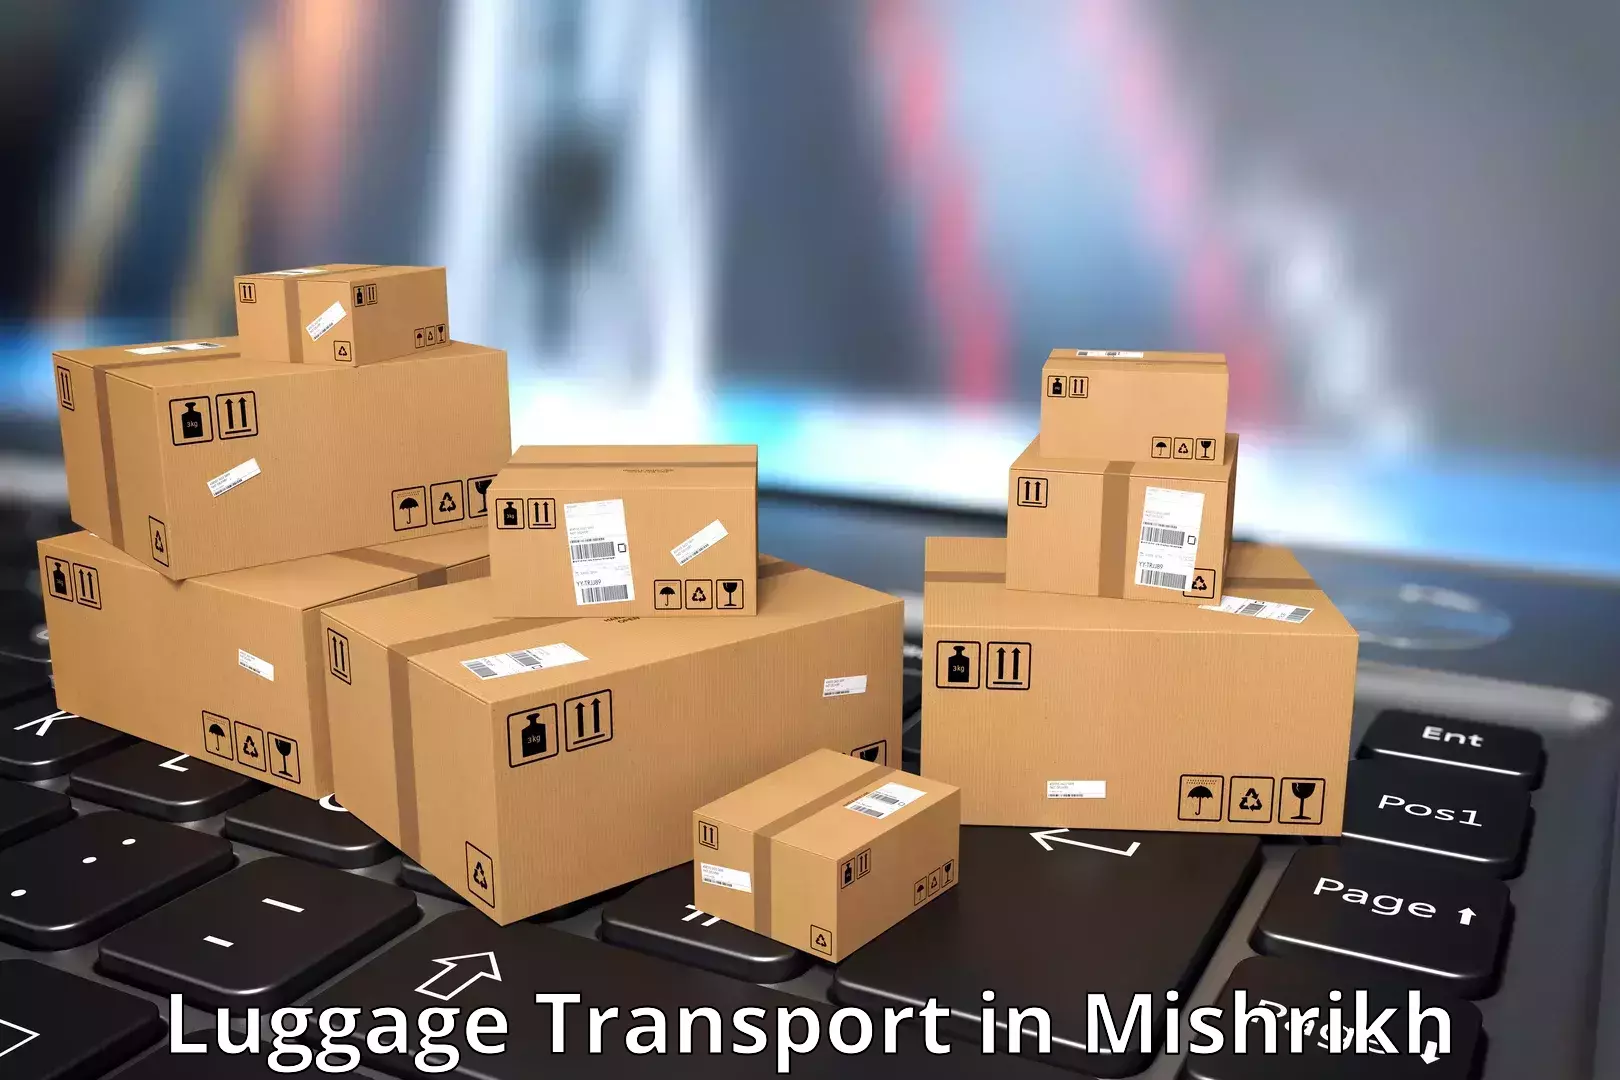 Luggage delivery system in Mishrikh